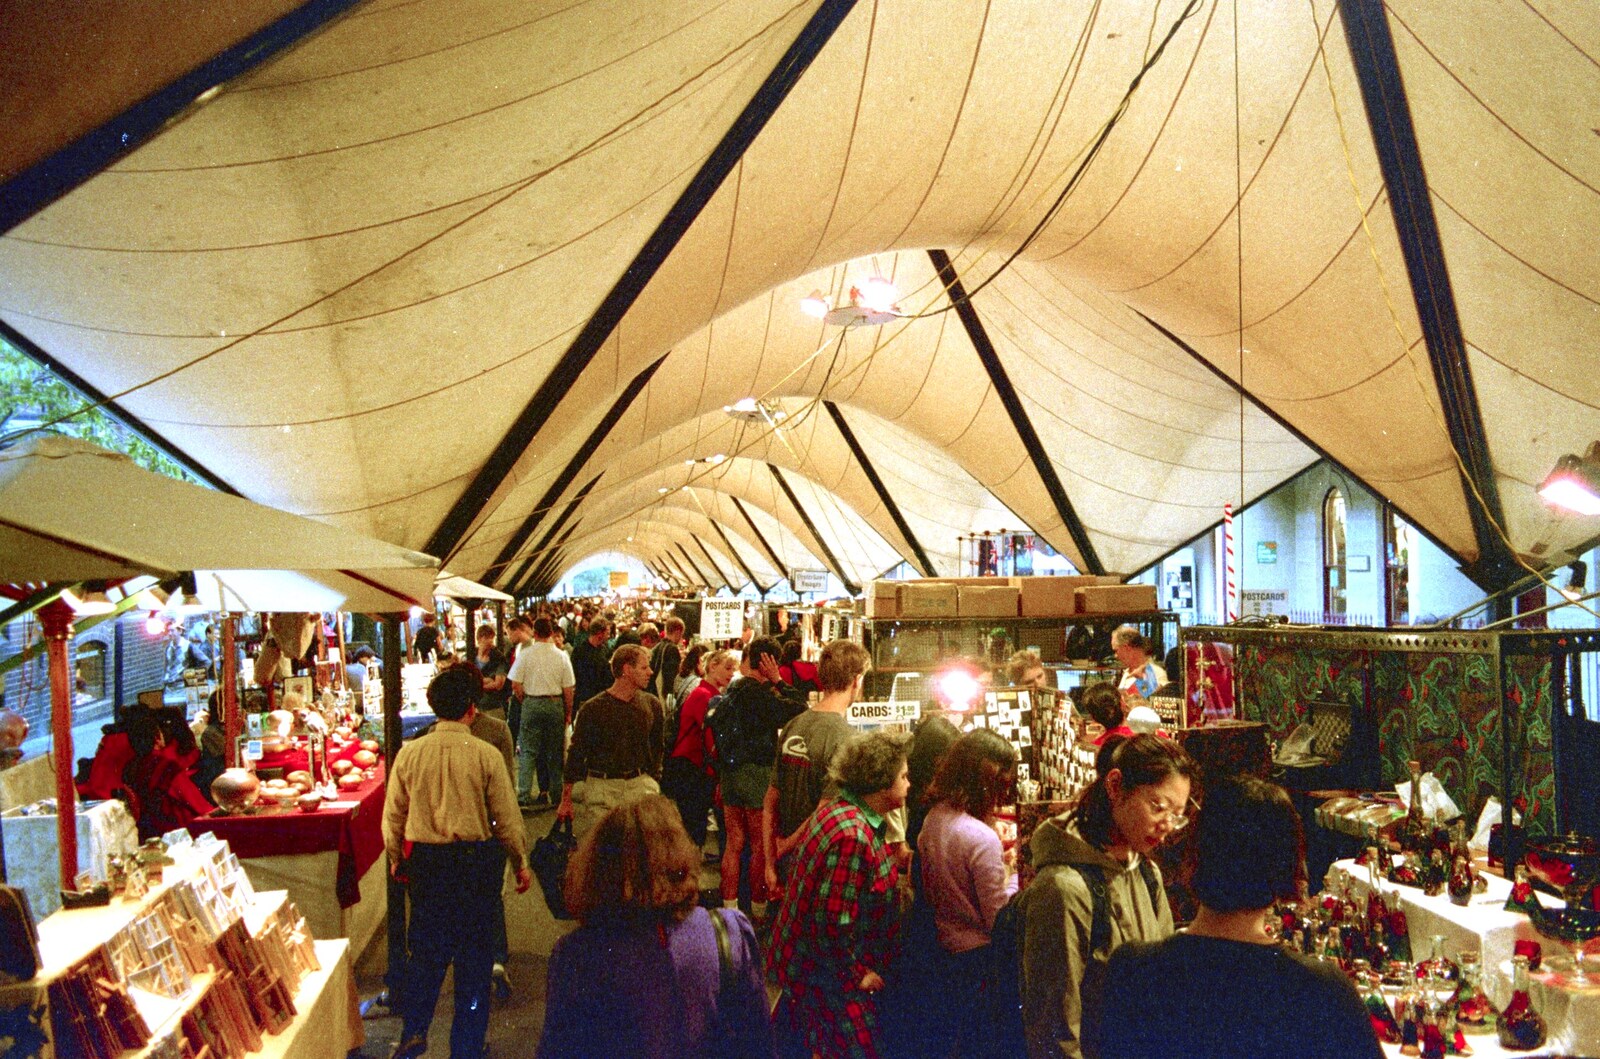 Inside the Rocks market from A Trip to the Zoo, Sydney, Australia - 7th April 2000